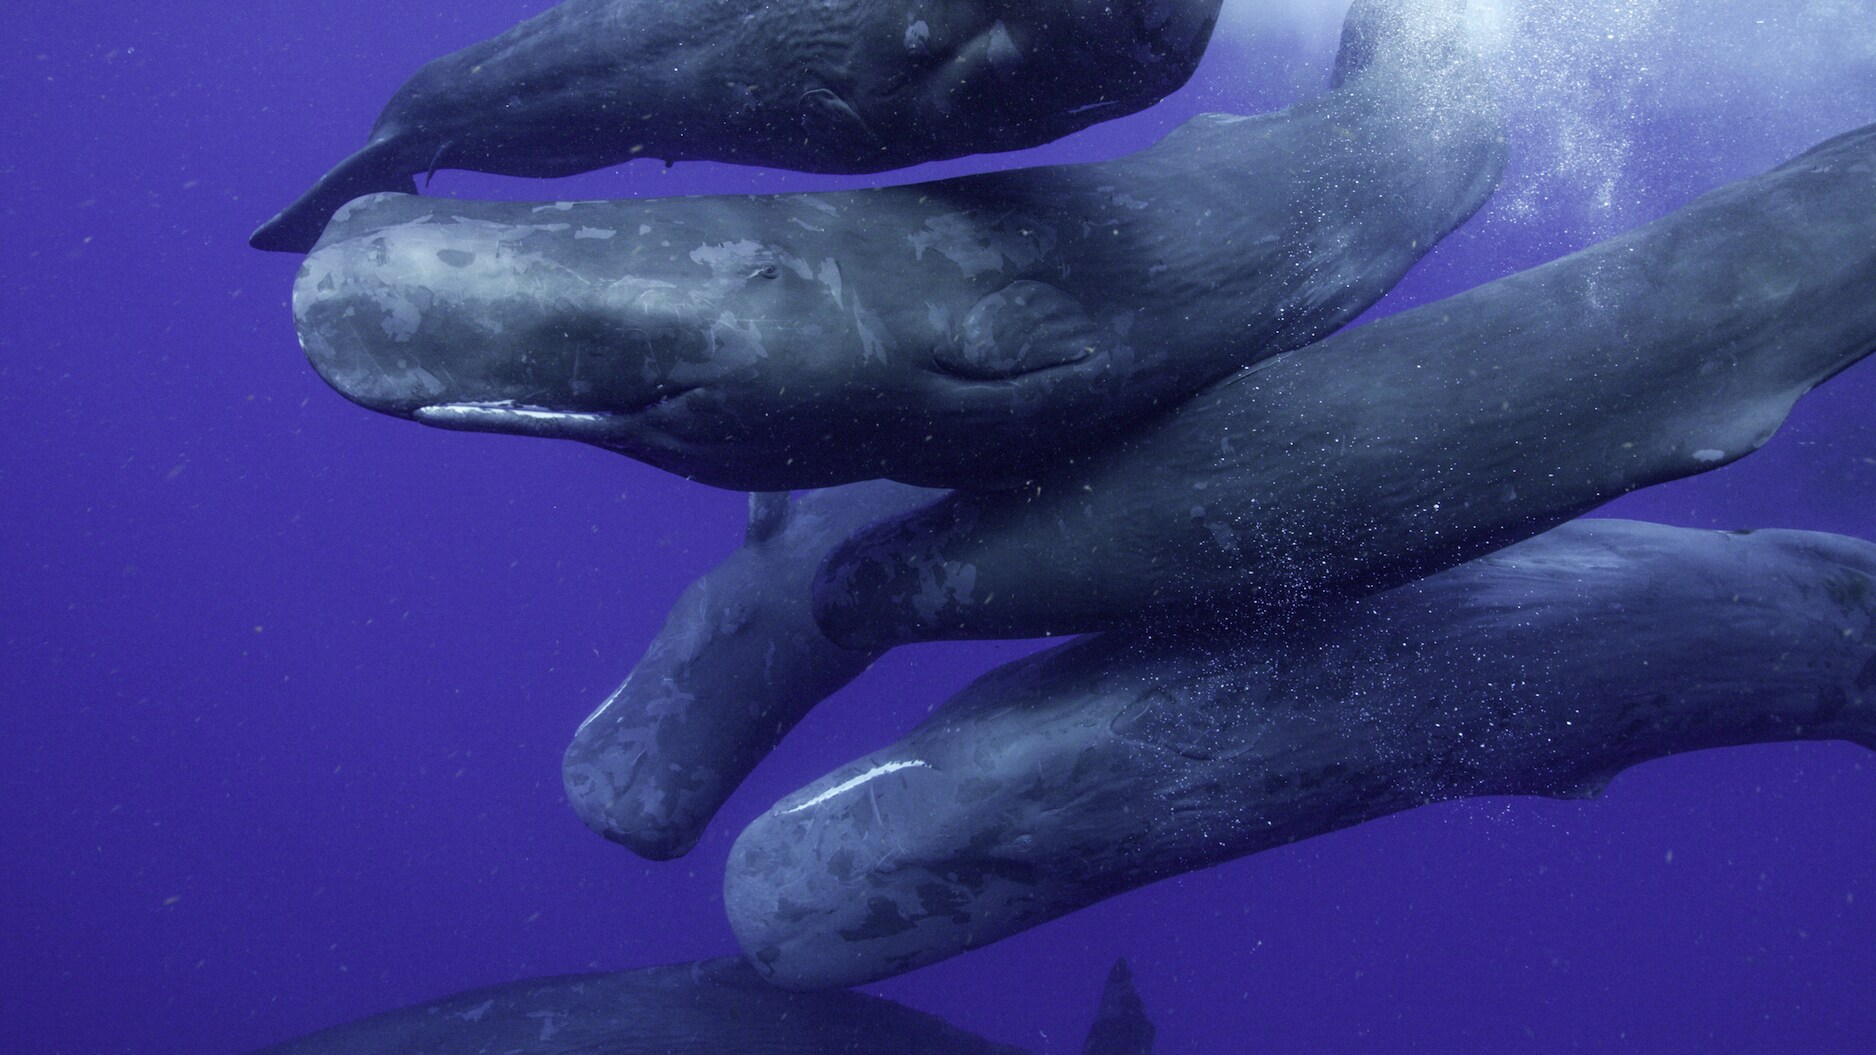 Many sperm whales are wandering nomads. They travel freely across vast stretches of ocean and stop to interact with local whales. (National Geographic for Disney+/Luis Lamar)